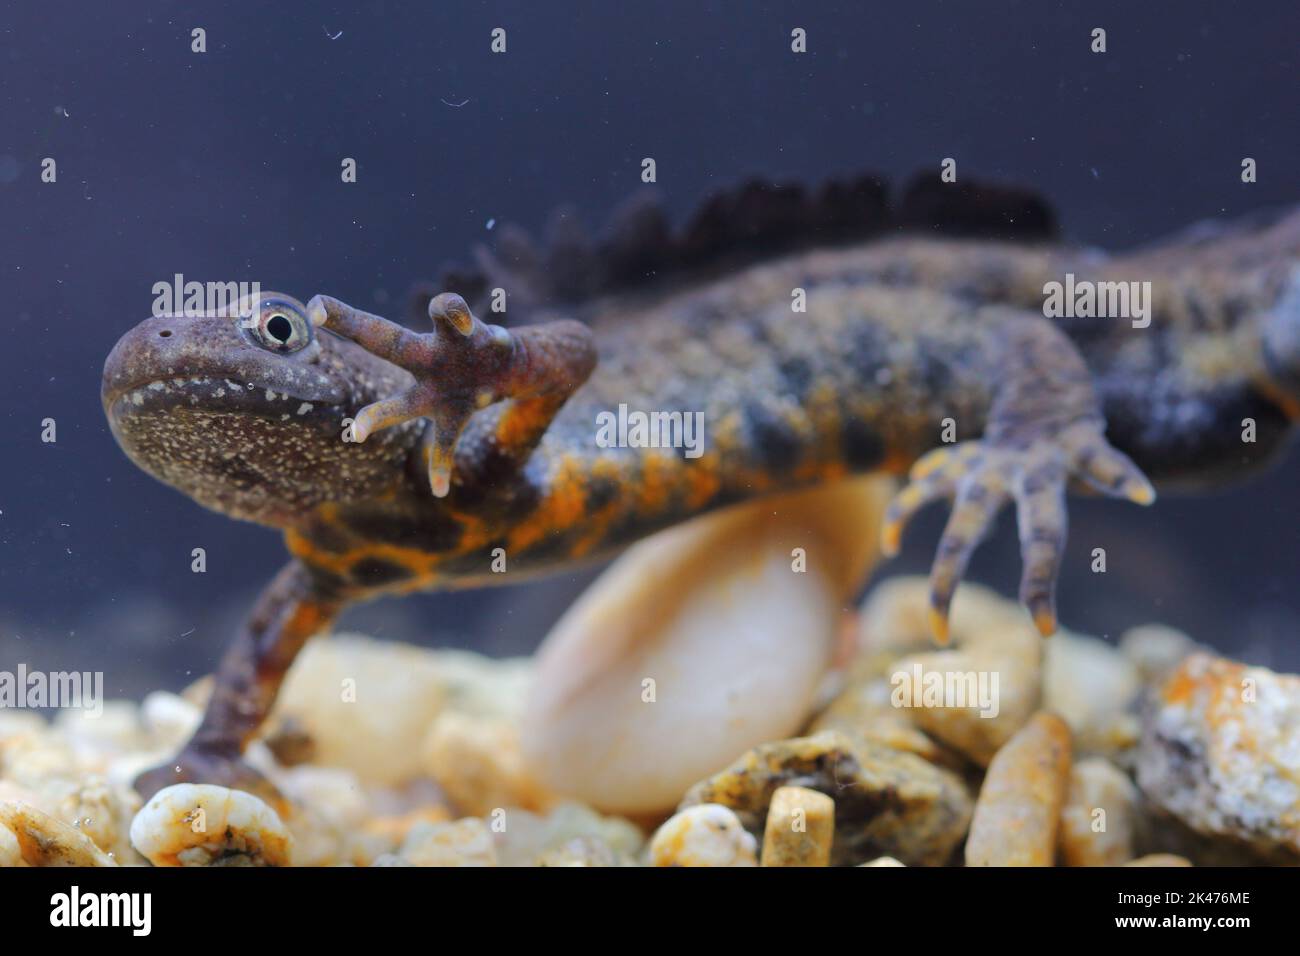 The Italian crested newt (Triturus carnifex) male in an underwater natural habitat Stock Photo